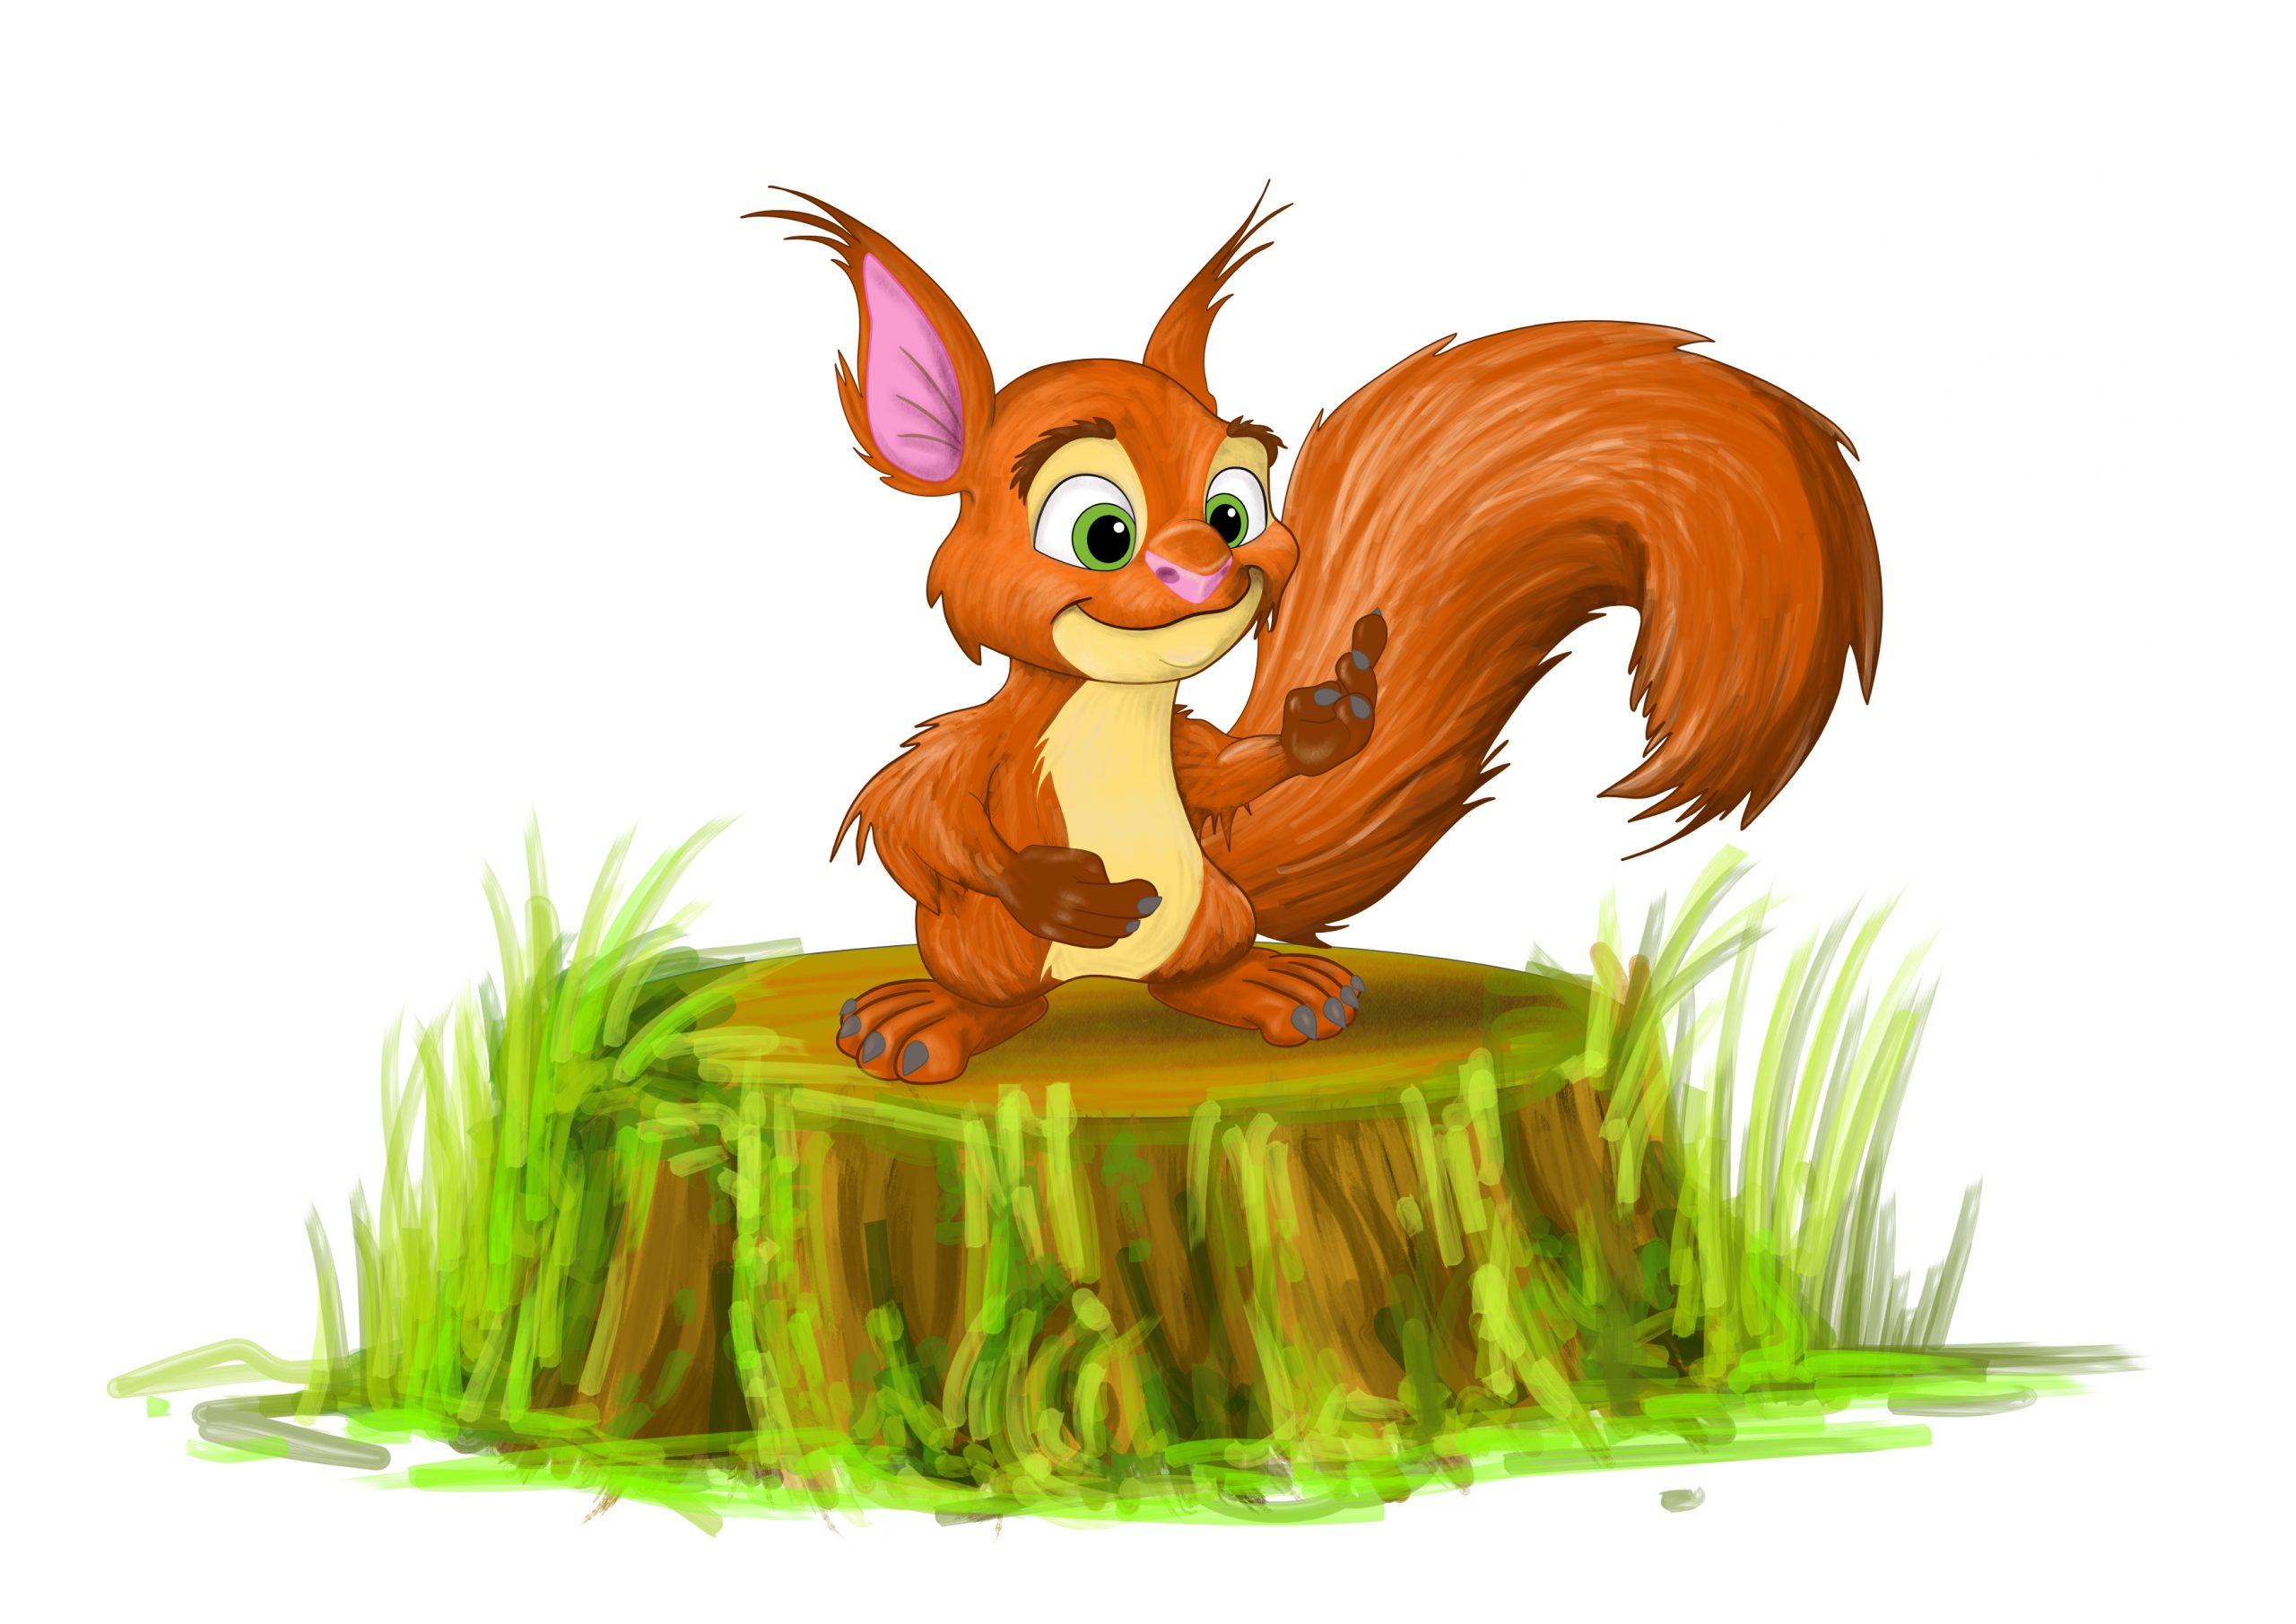 Squirrel character concept